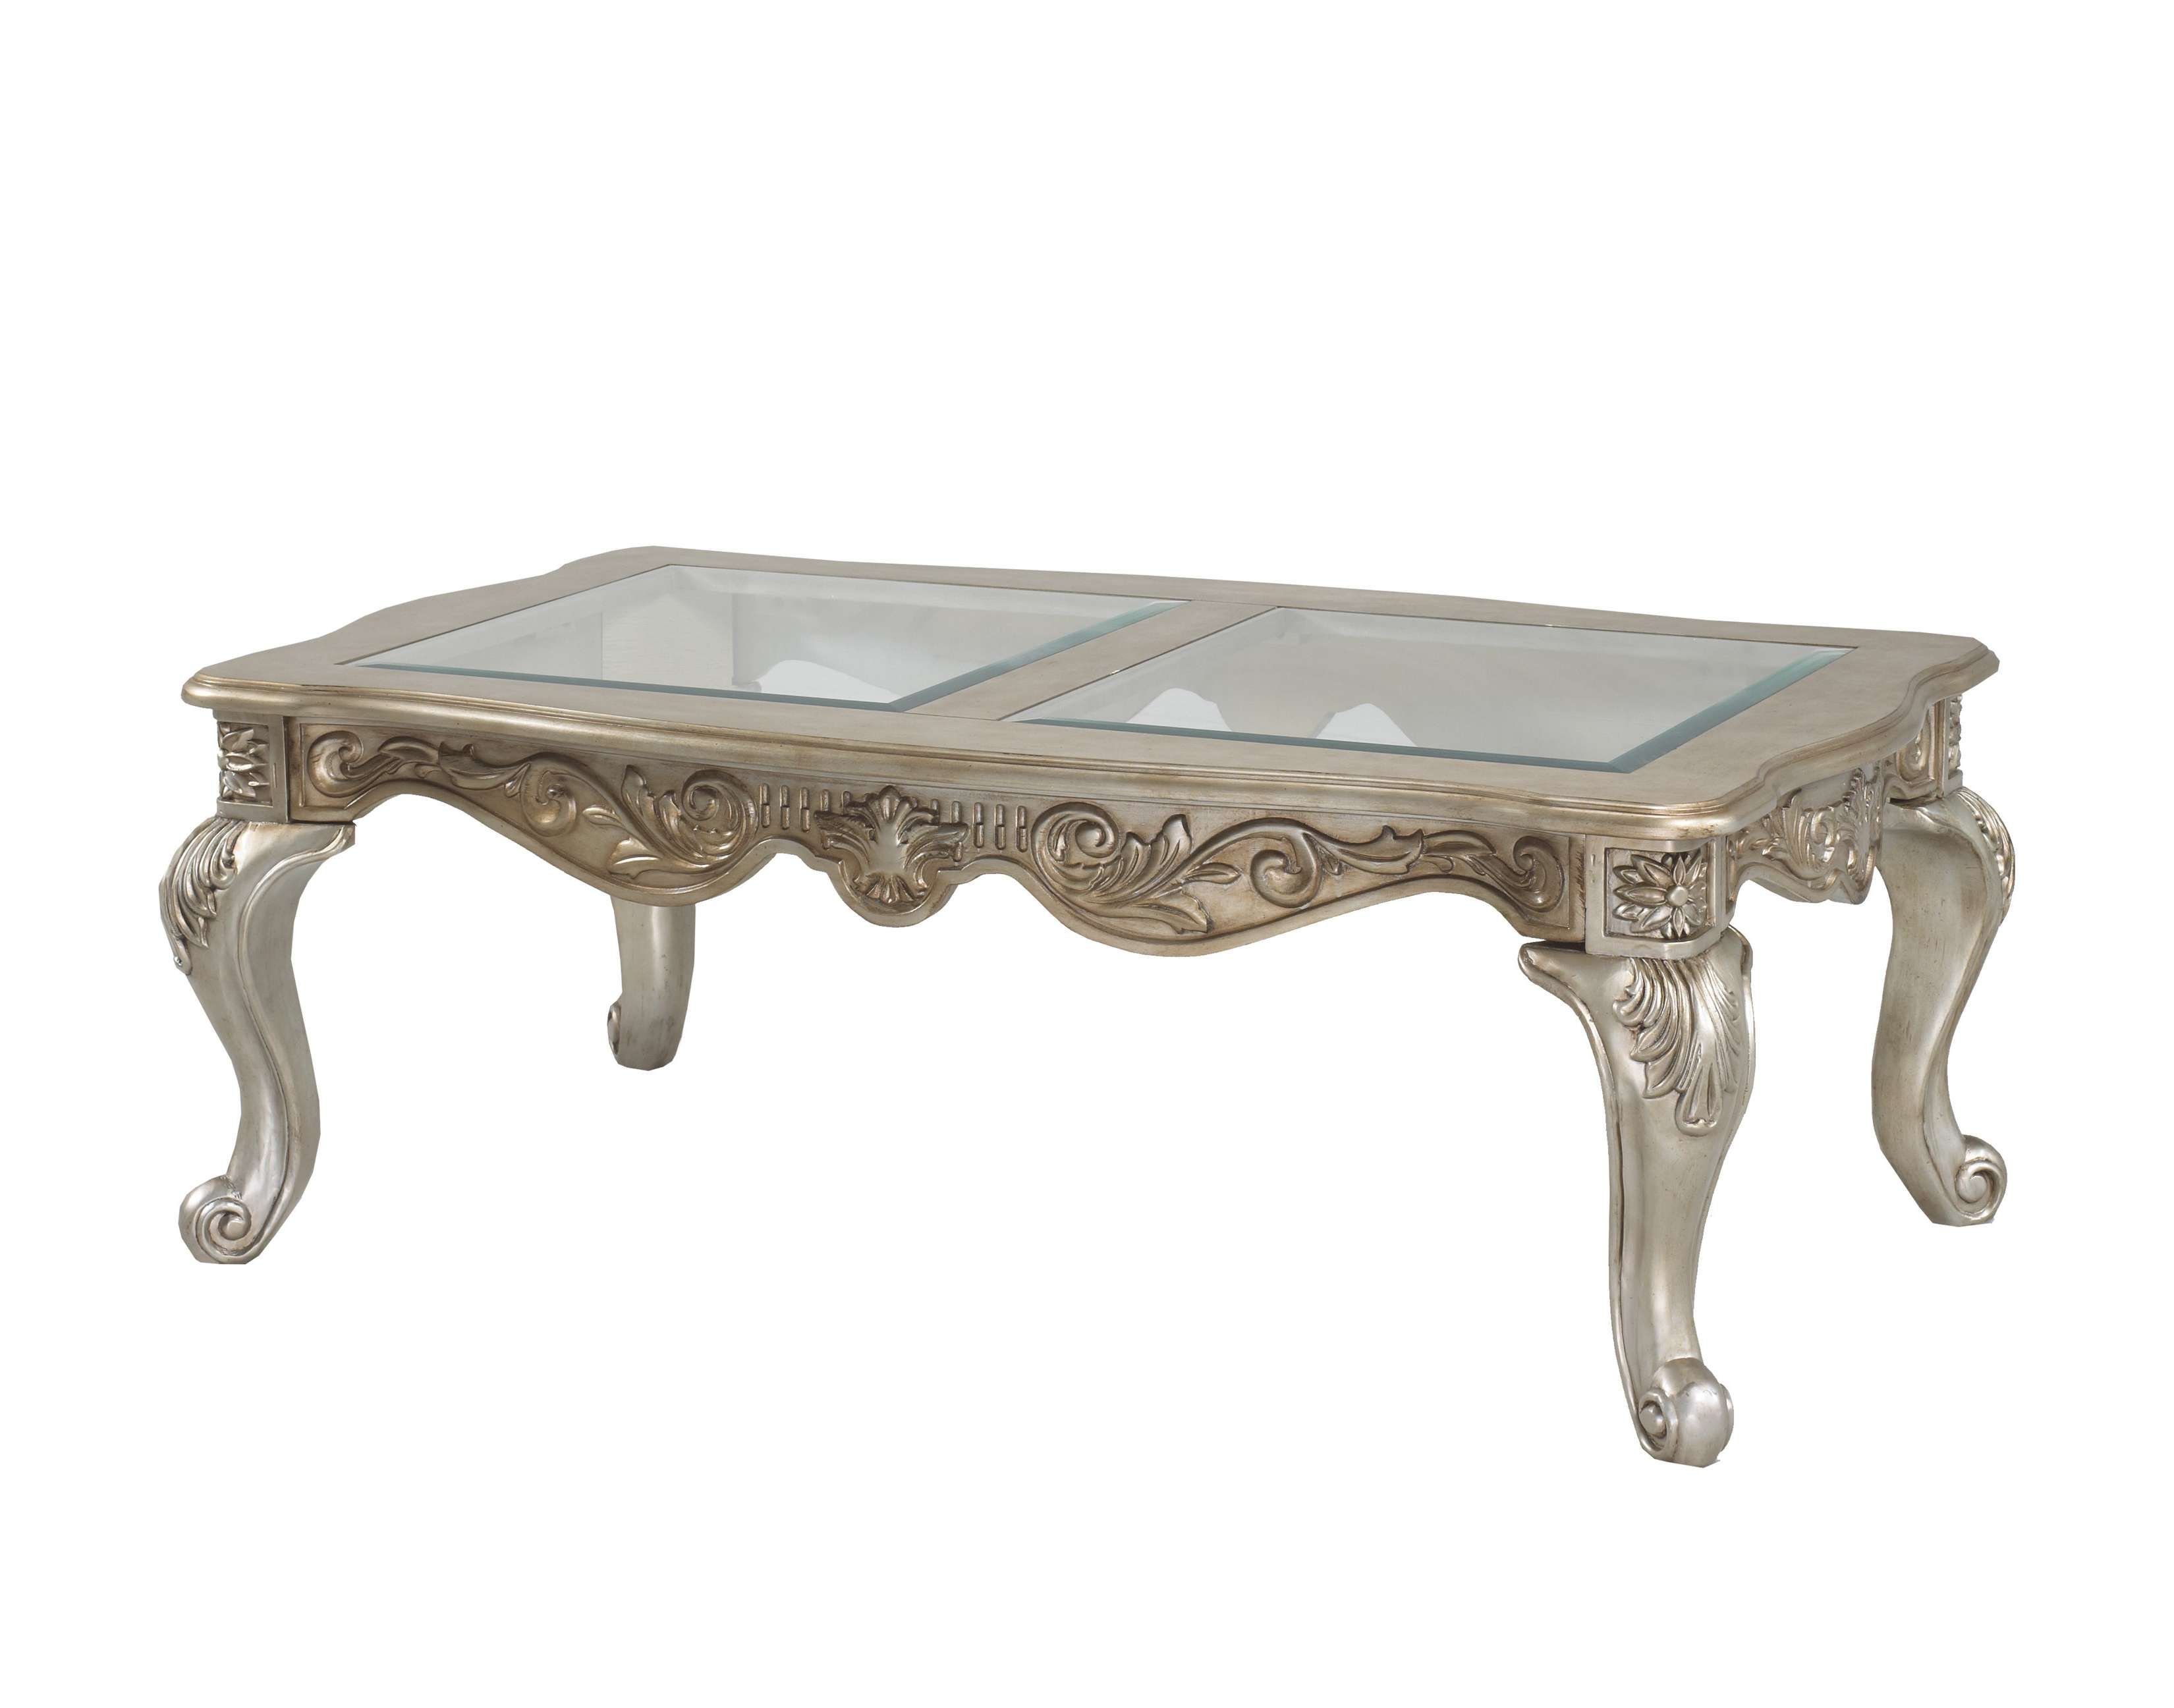 Coffee Tables : Furniture French Style Antique Metal Coffee Table Inside Trendy Vintage Glass Coffee Tables (Gallery 2 of 20)